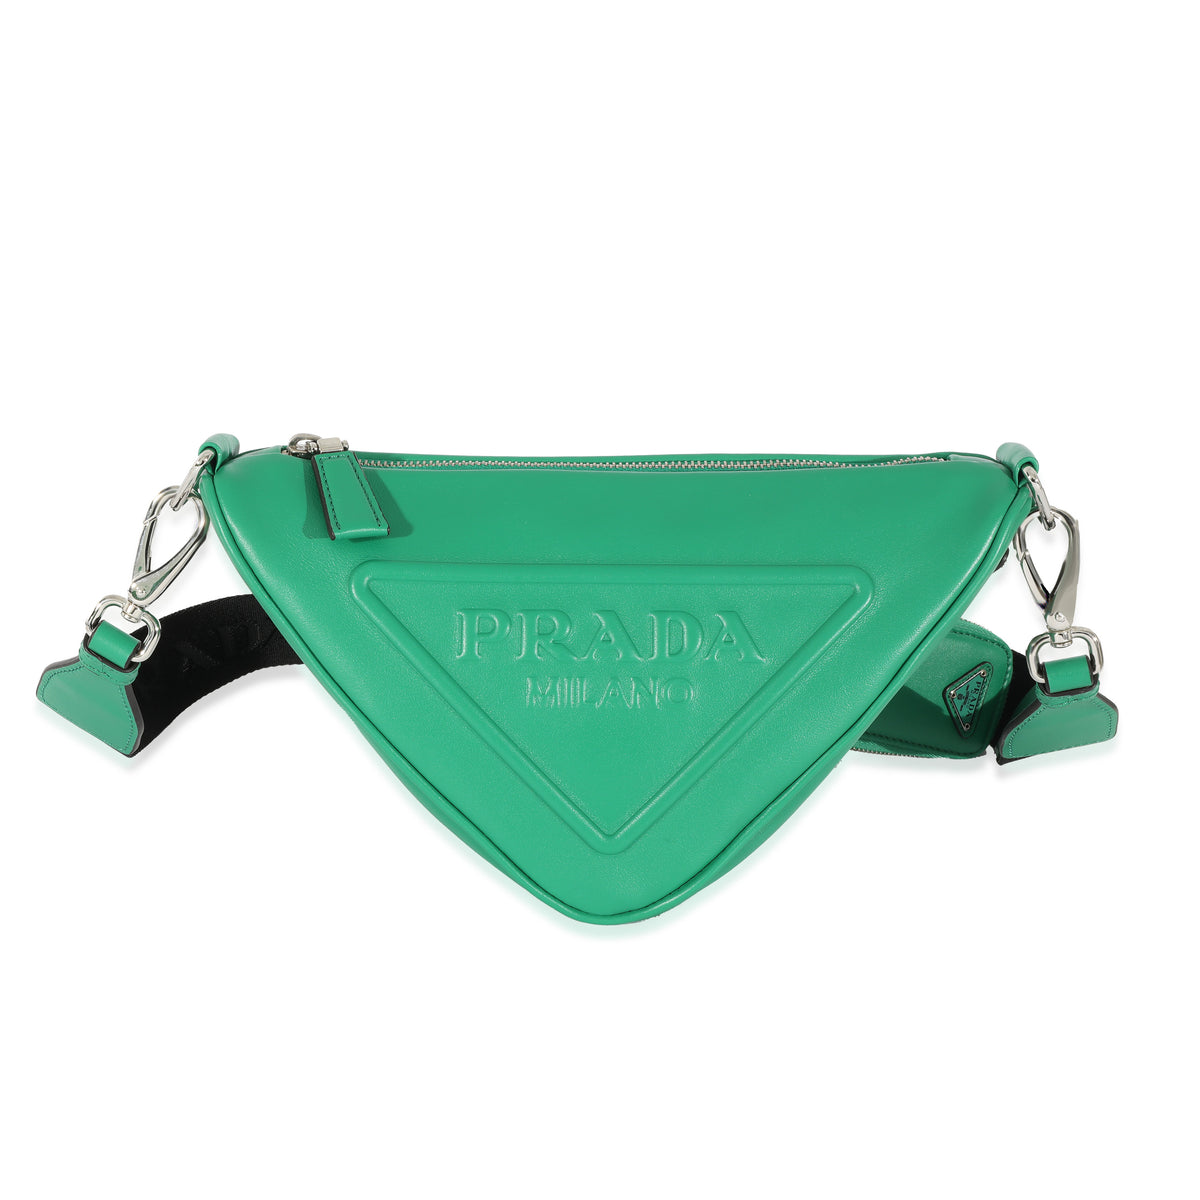 Prada Green Saffiano Leather Wallet On A Chain